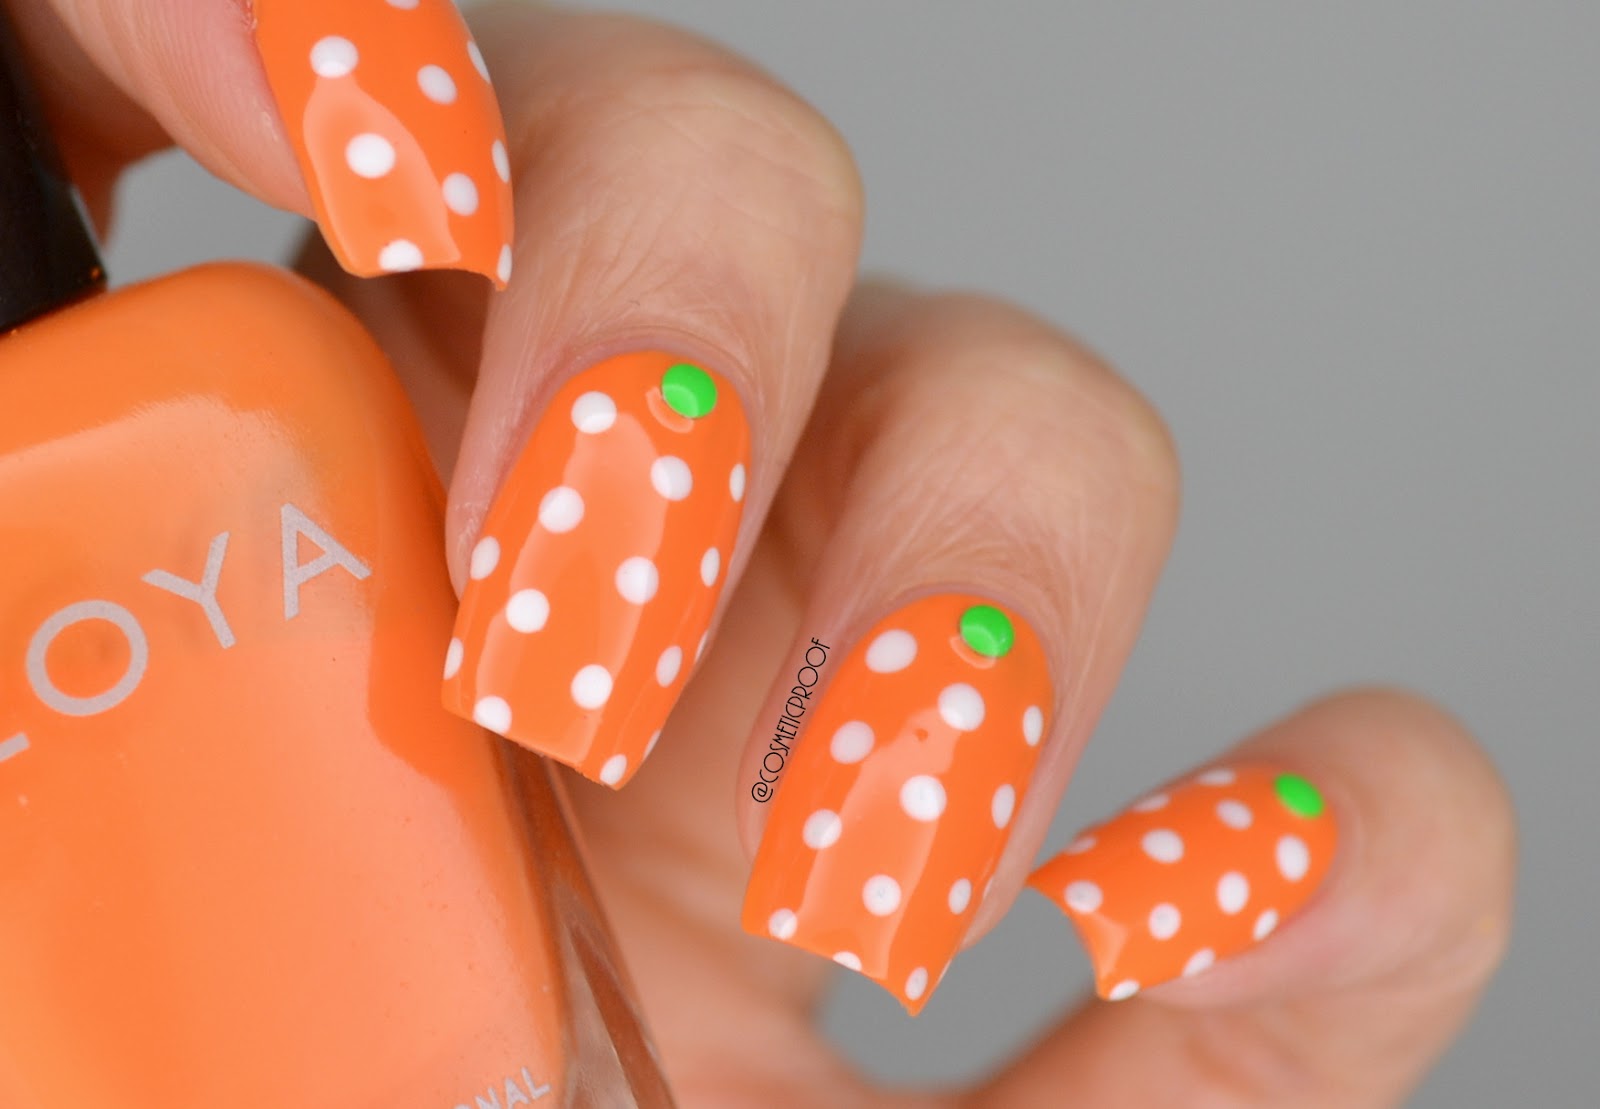 Nails Happy Summer Polka Dots Cosmetic Proof Vancouver Beauty Nail Art And Lifestyle Blog